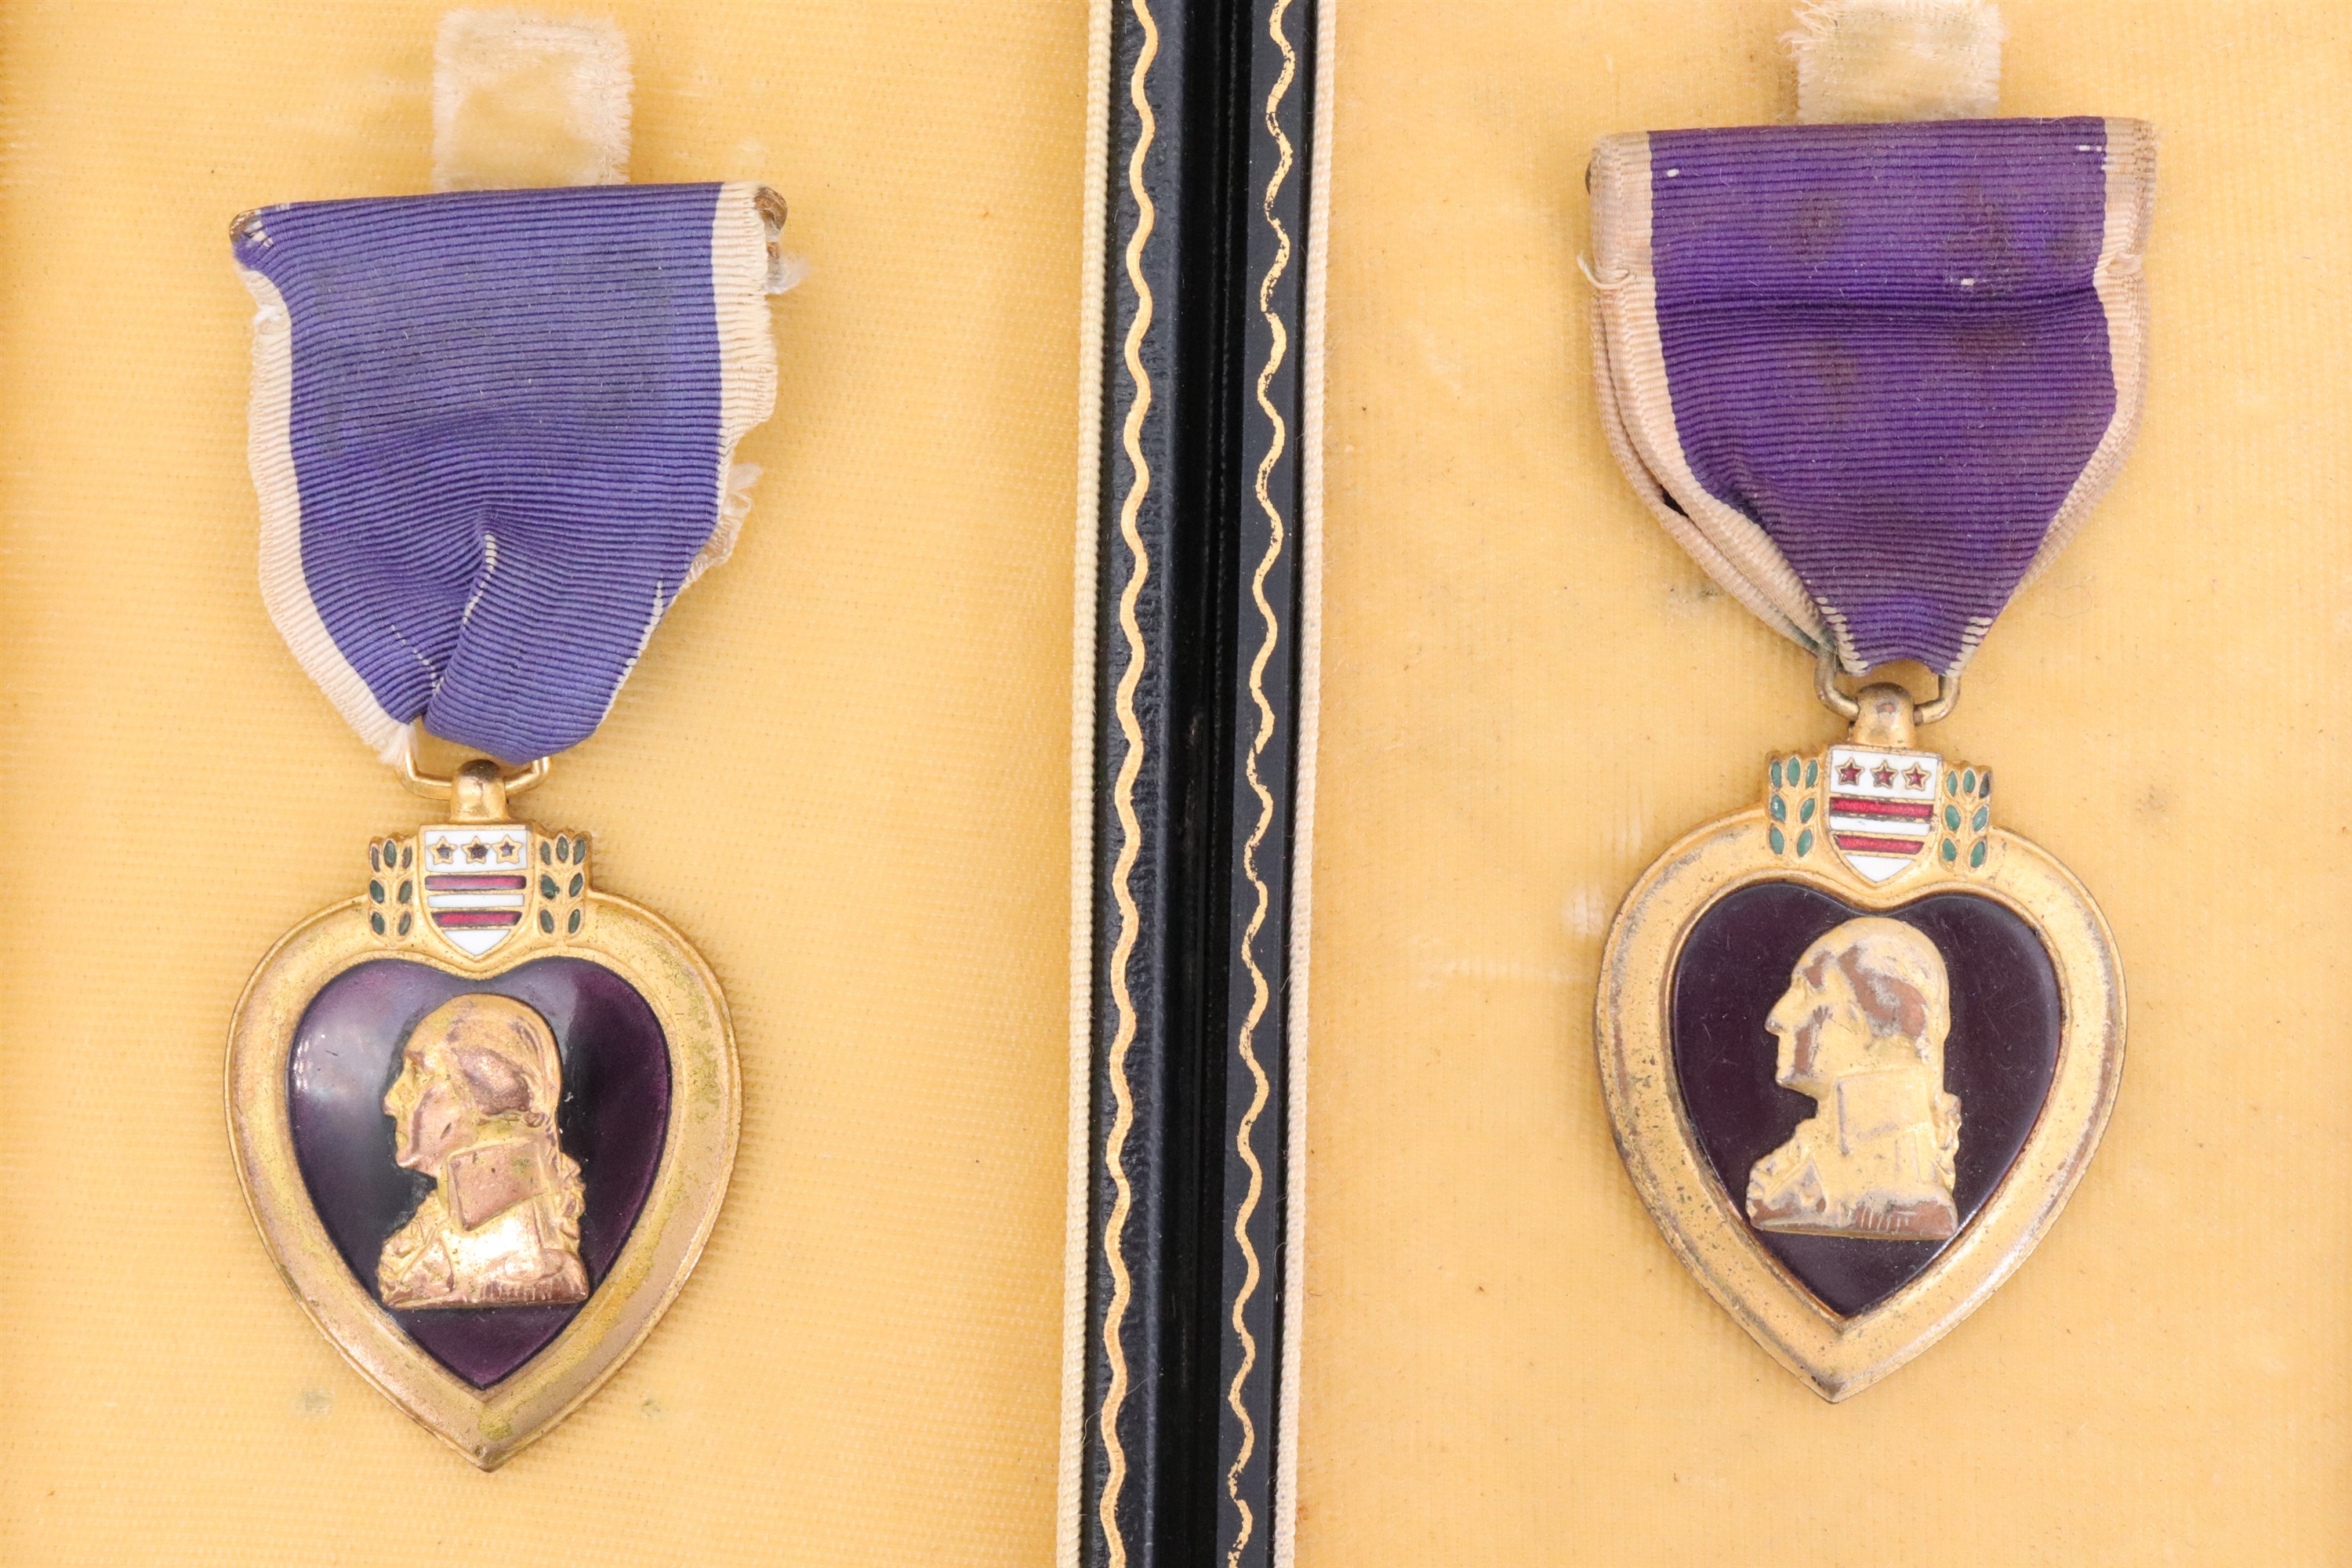 Two US Purple Heart medals, cased - Image 2 of 4